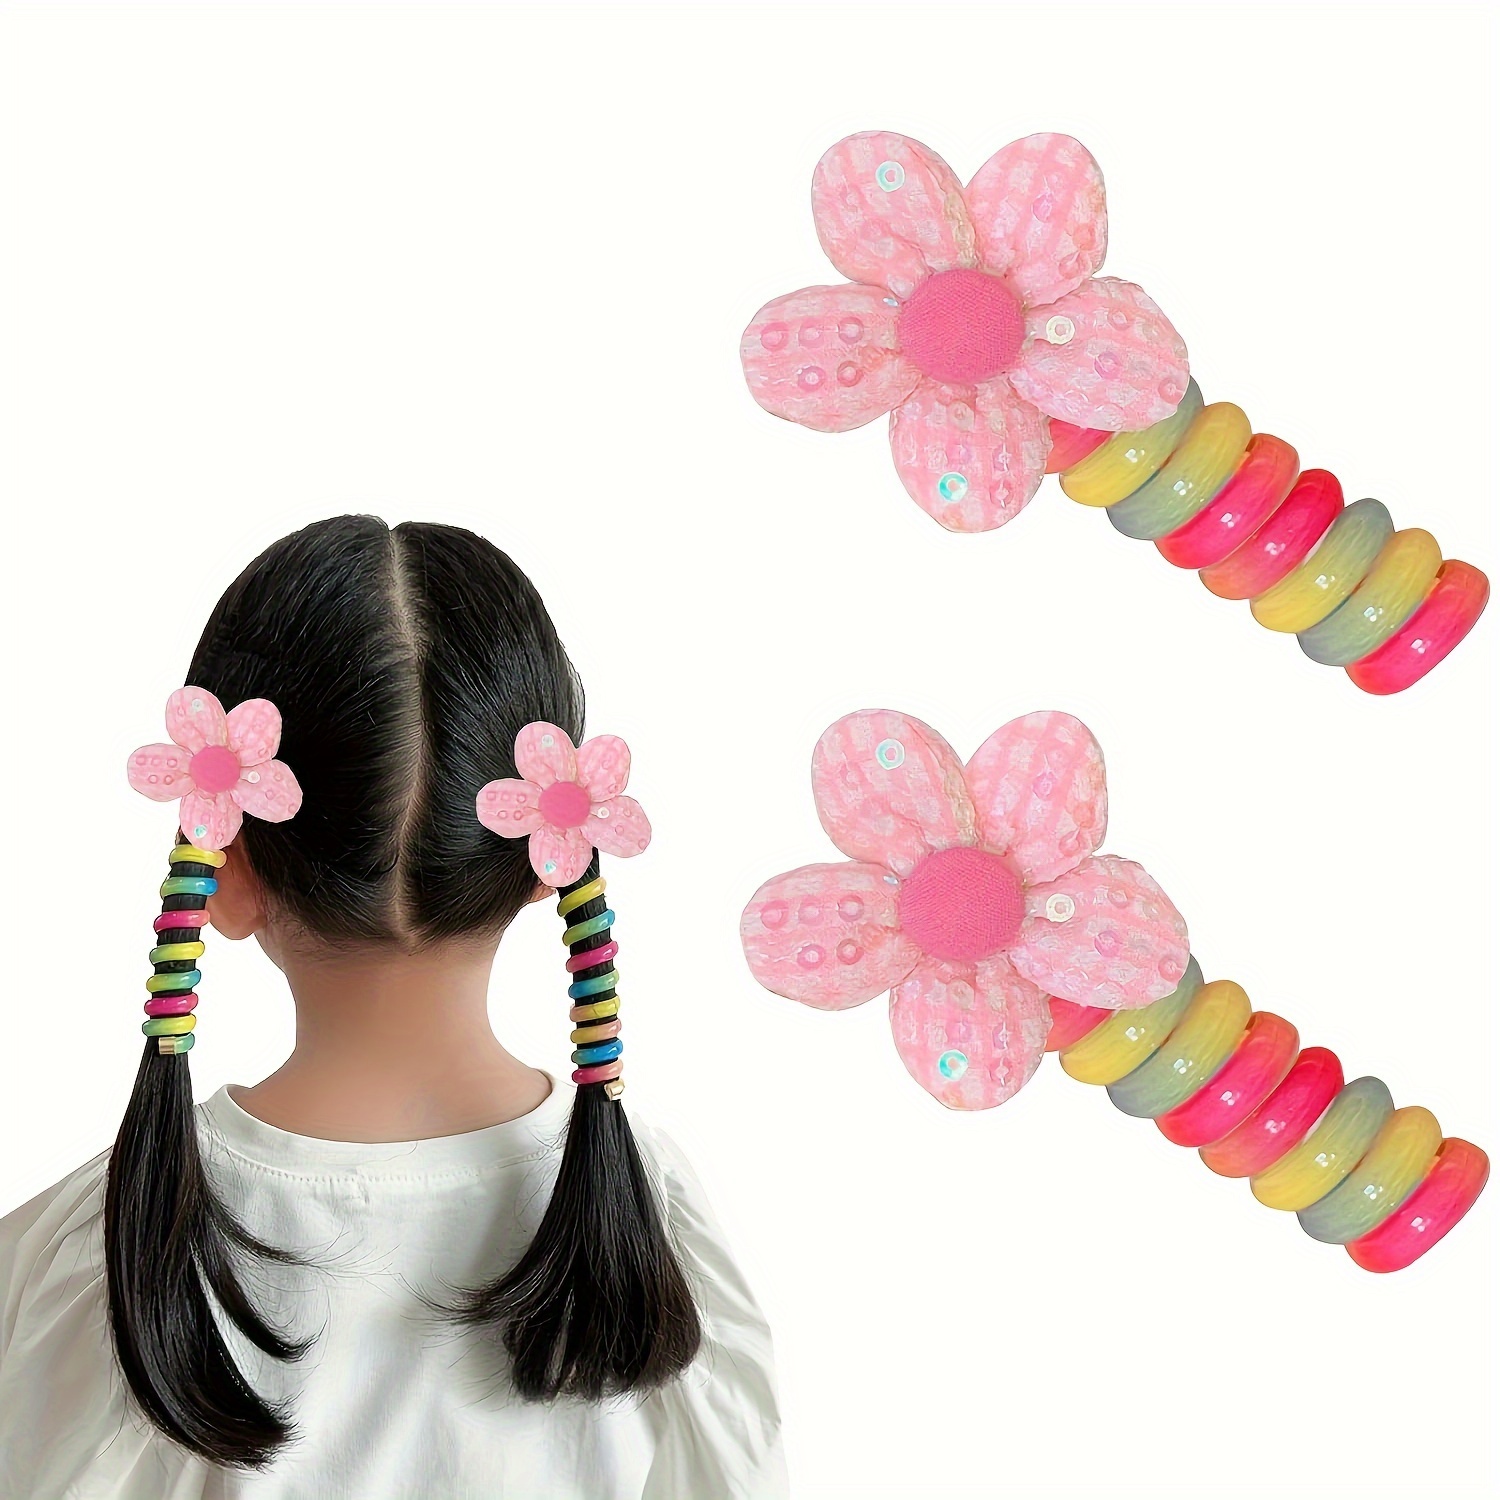 Magical Temporary Hair Accessories for Expressive Kids and Teens